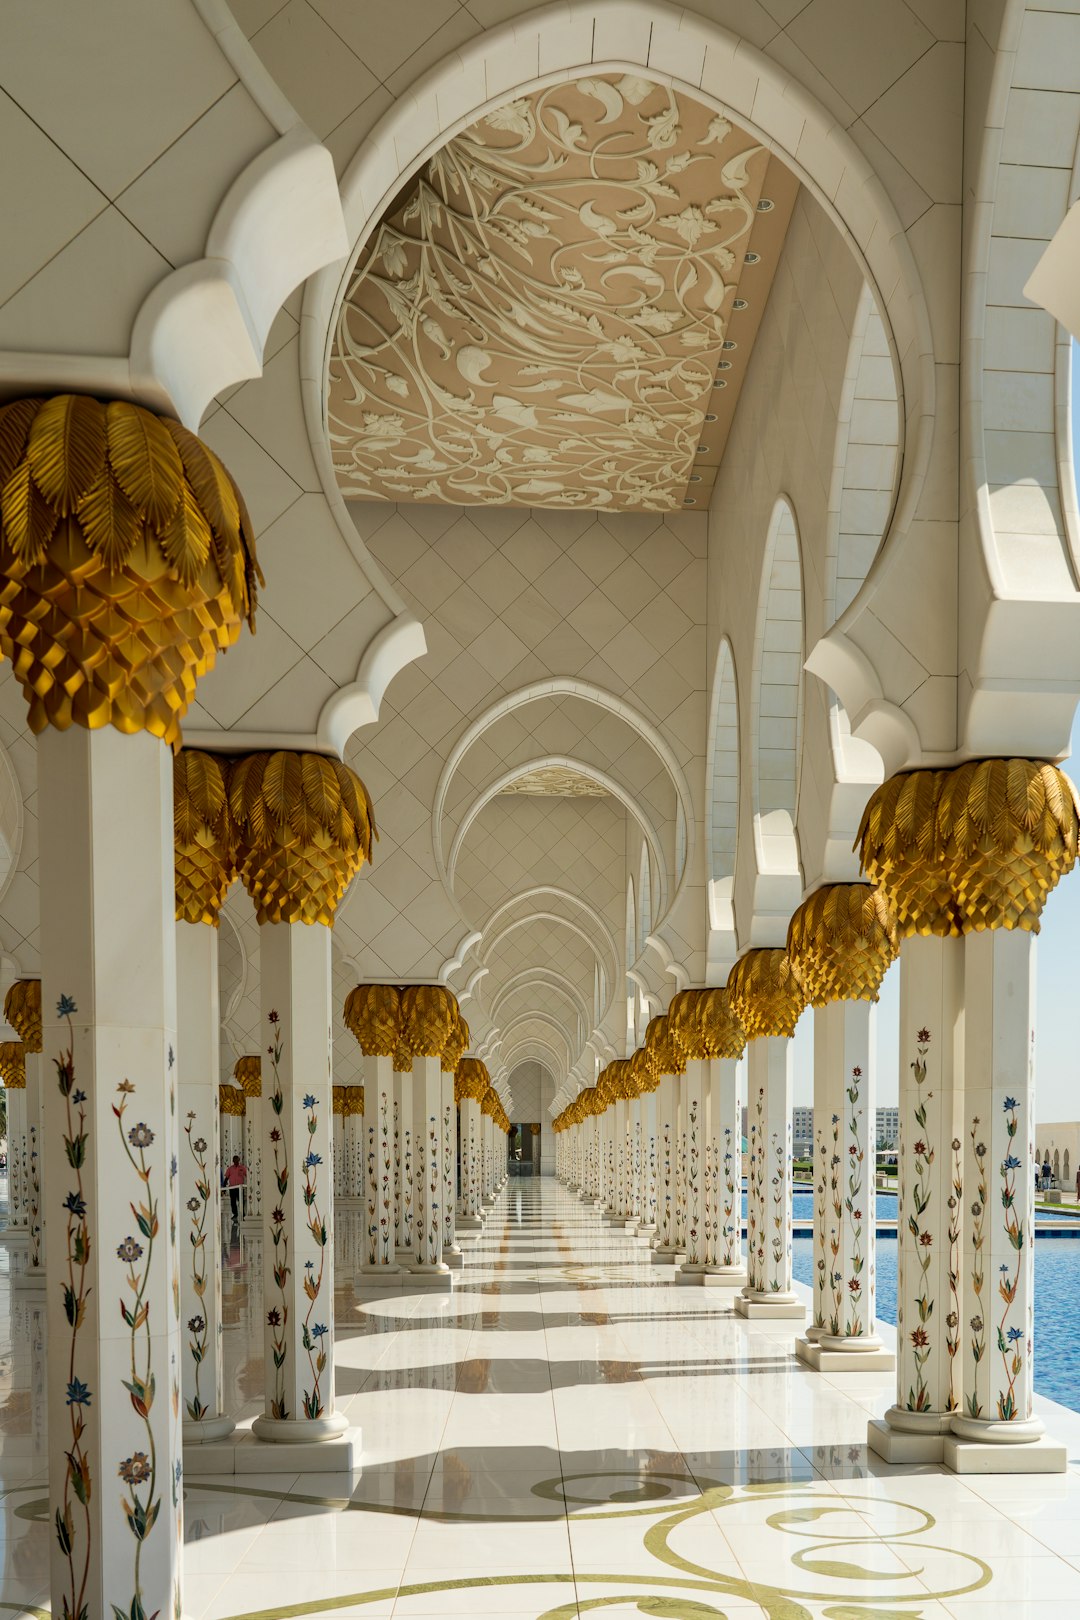 travelers stories about Place of worship in Sheikh Zayed Grand Mosque - 5th St - Abu Dhabi - United Arab Emirates, United Arab Emirates